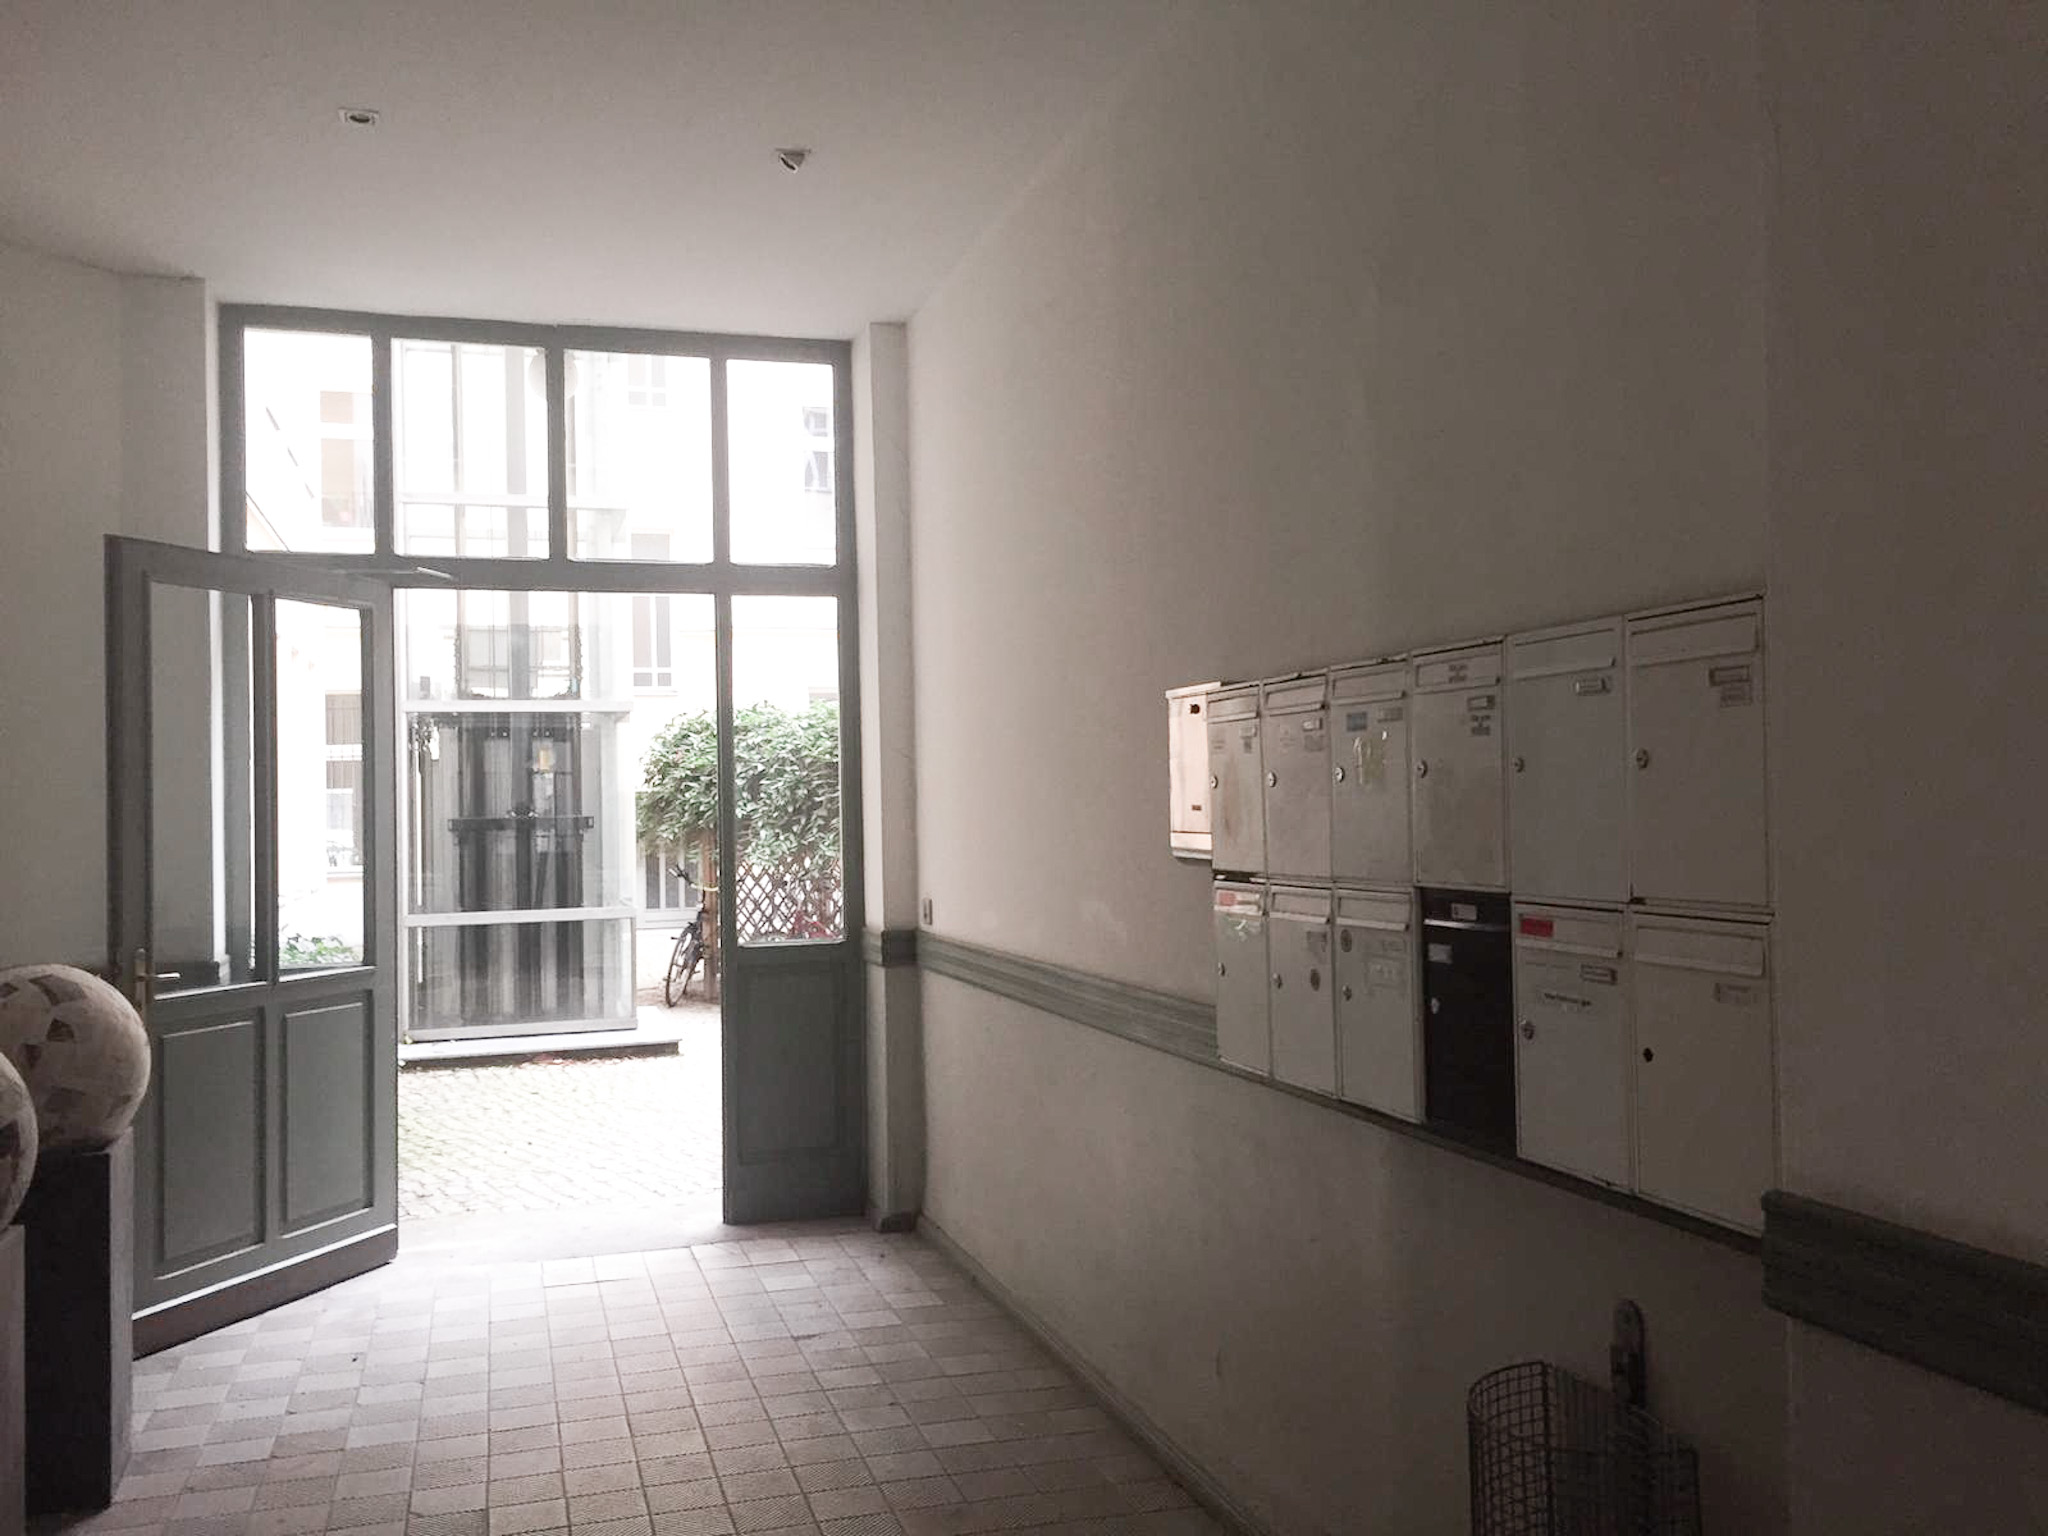 mailboxes in an apartment building (built into the wall in the foyer)